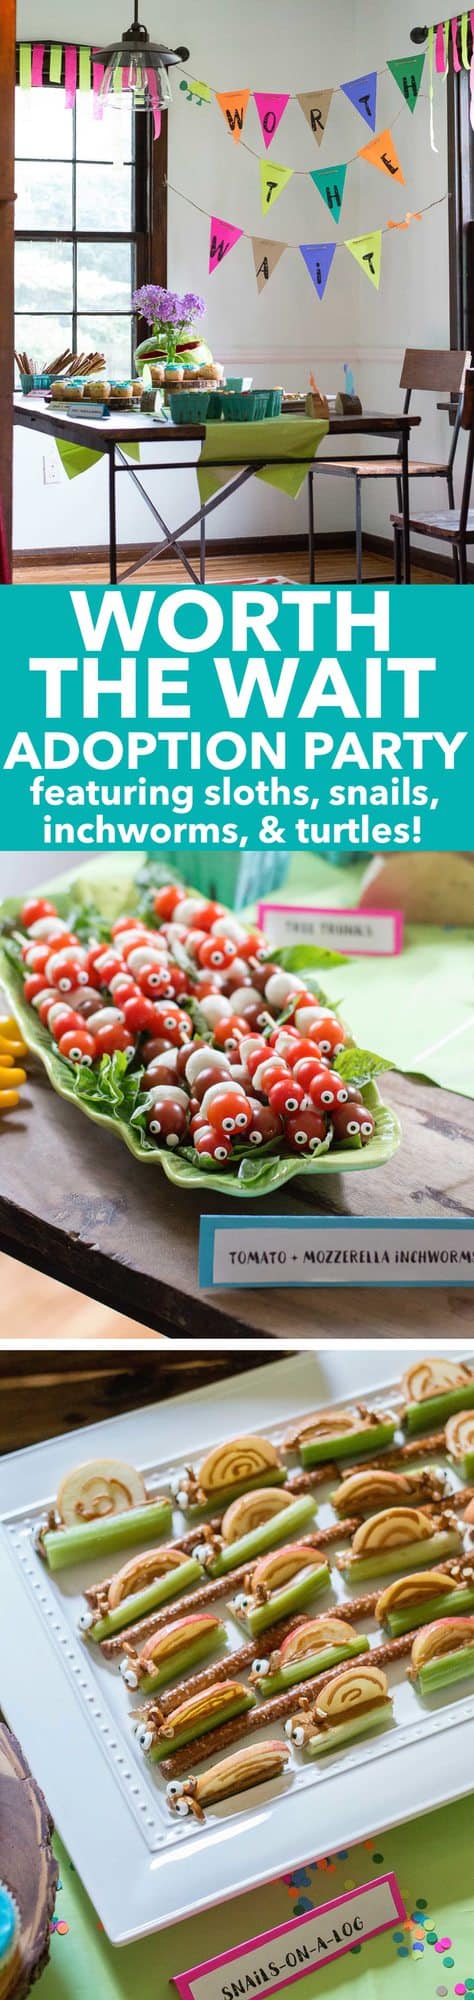 Worth the wait theme adoption party! Featuring slow animals - sloths, inchworms, turtles and snails! Tons of cute food ideas!